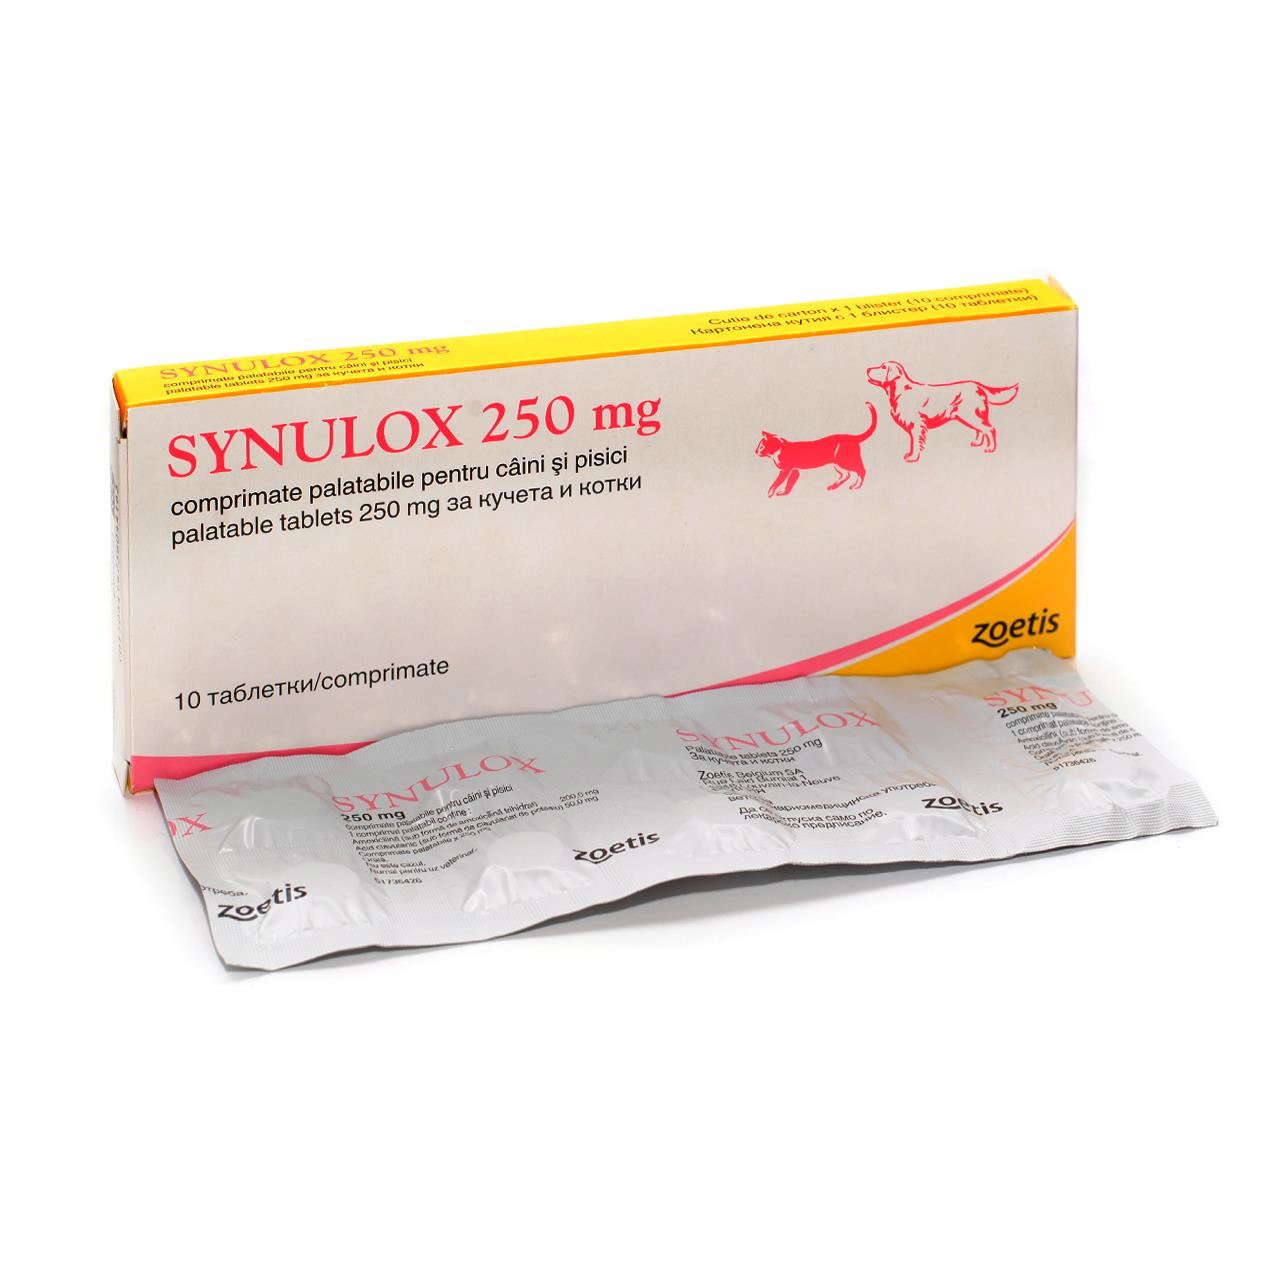 Synulox 250 mg, 10 tablete